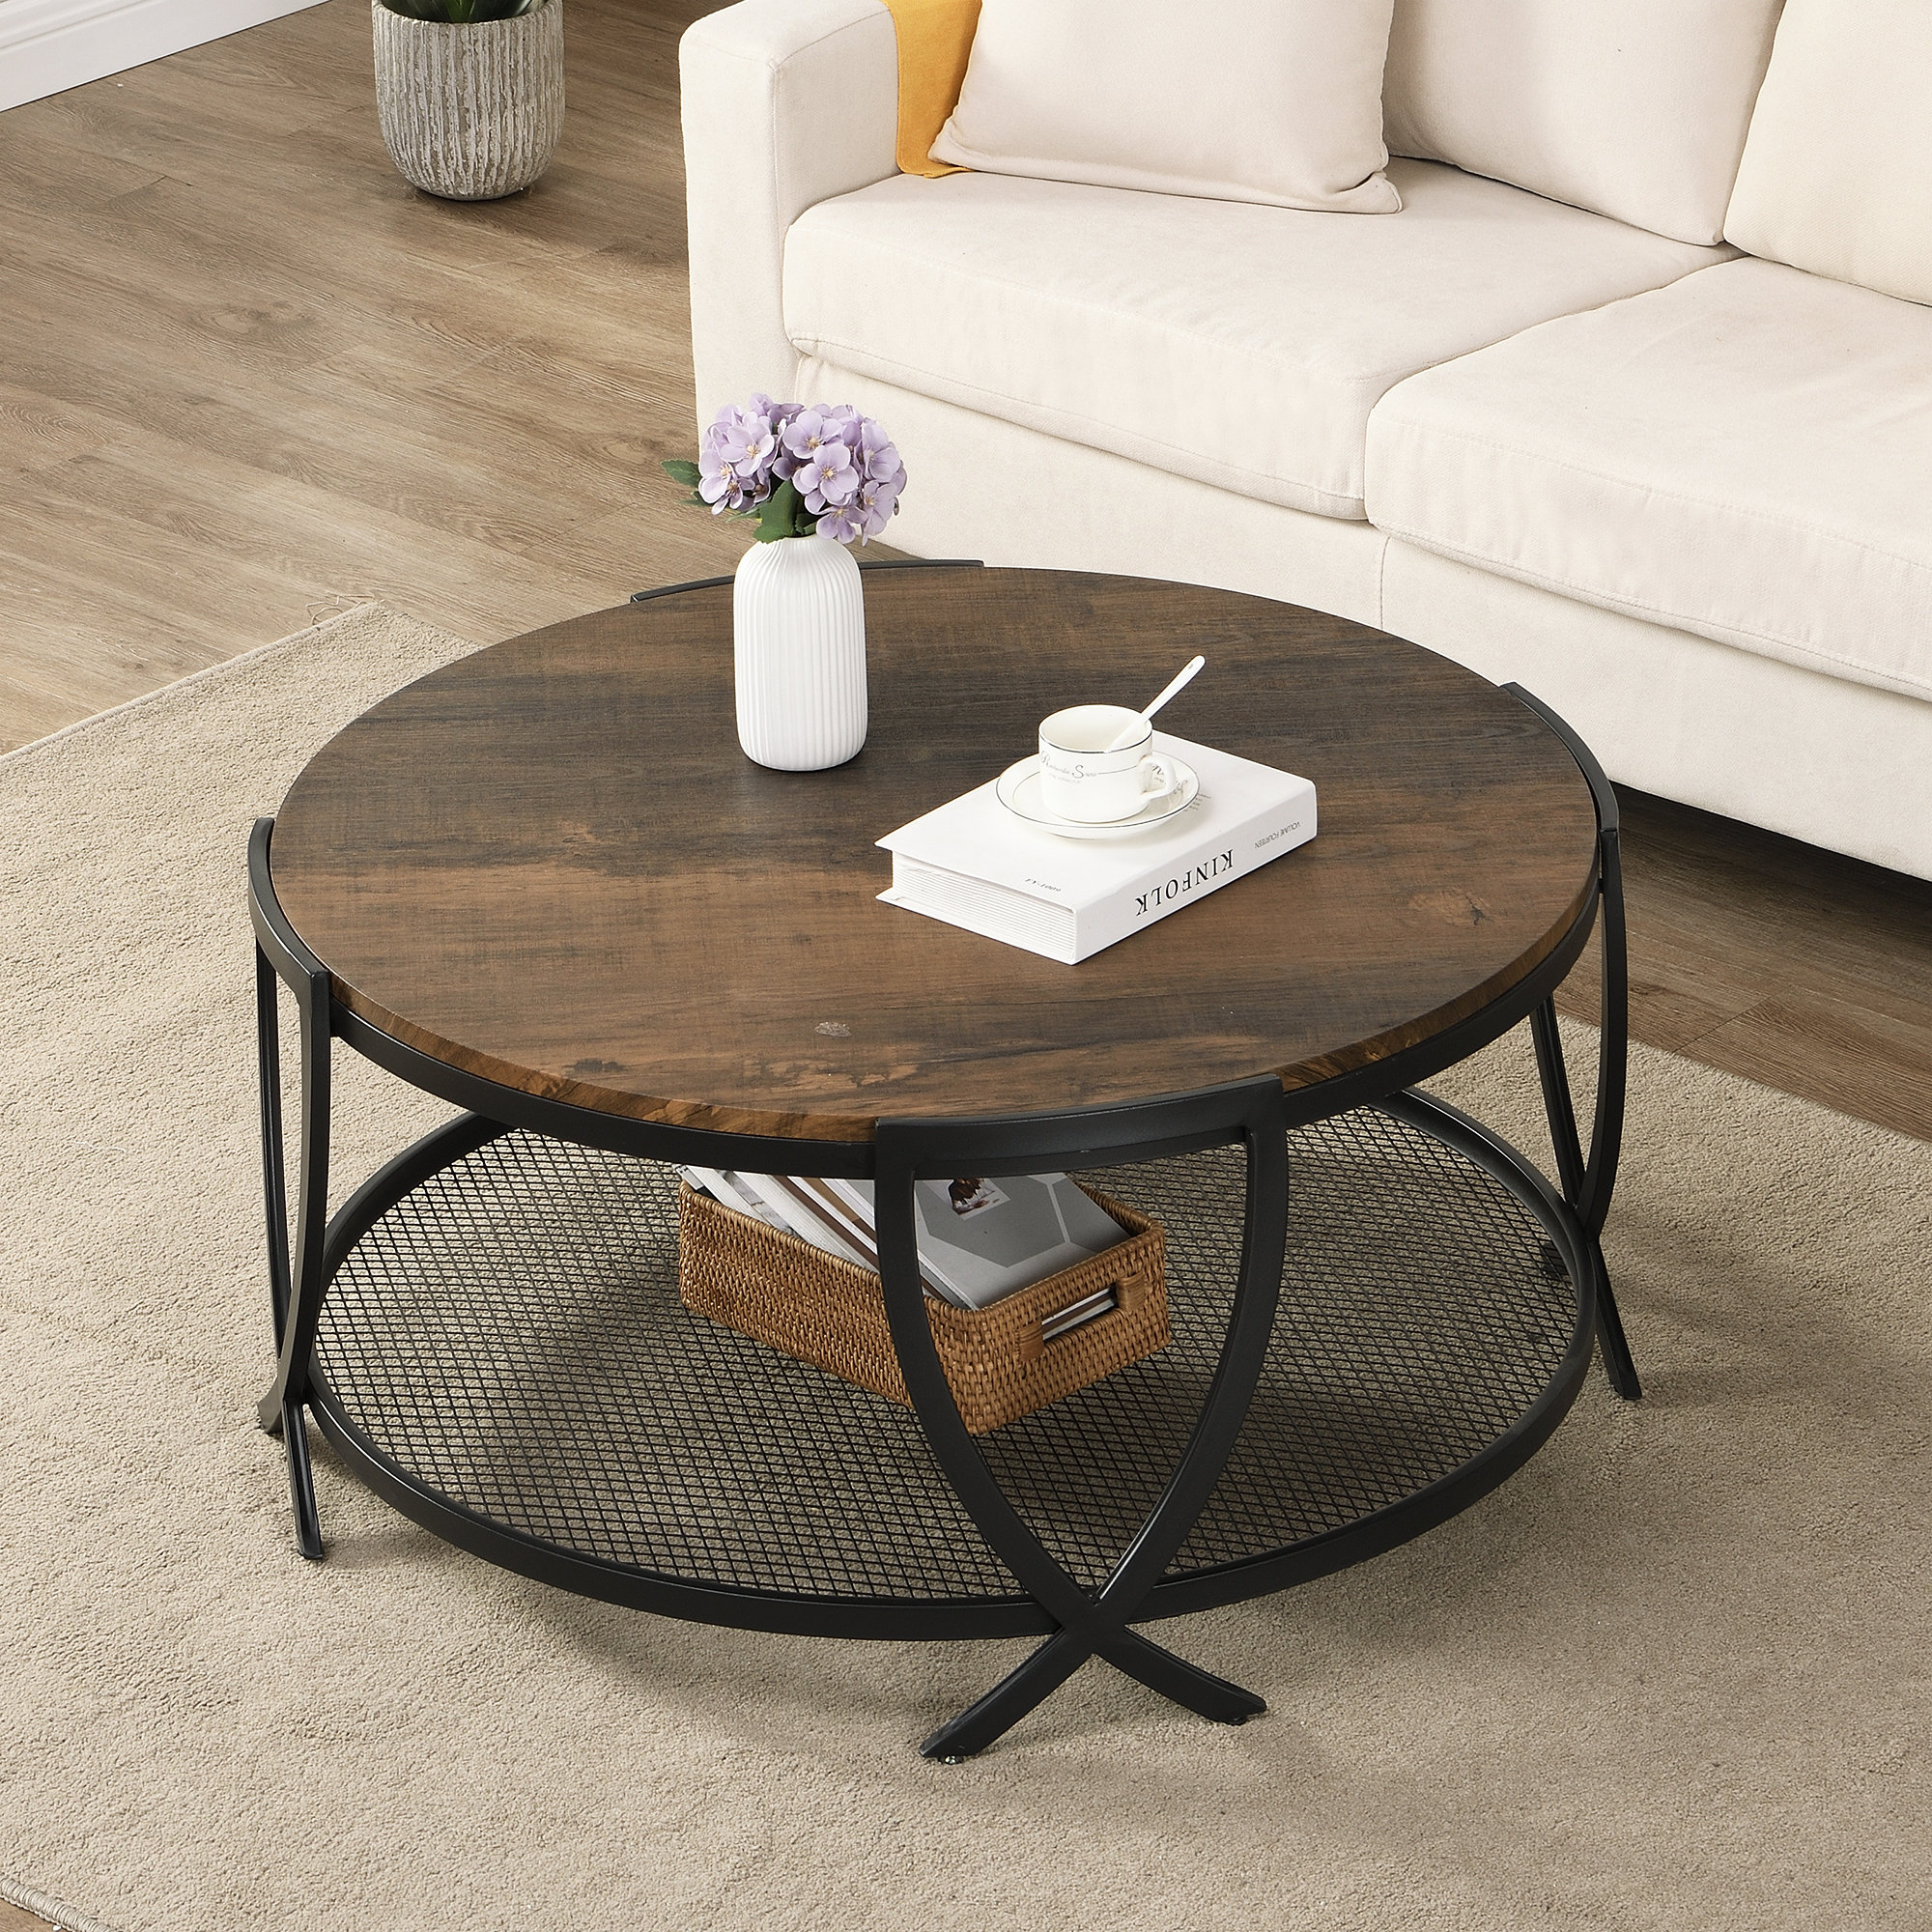 End Tables Living Room Oval Coffee Table with Tray Desktop for